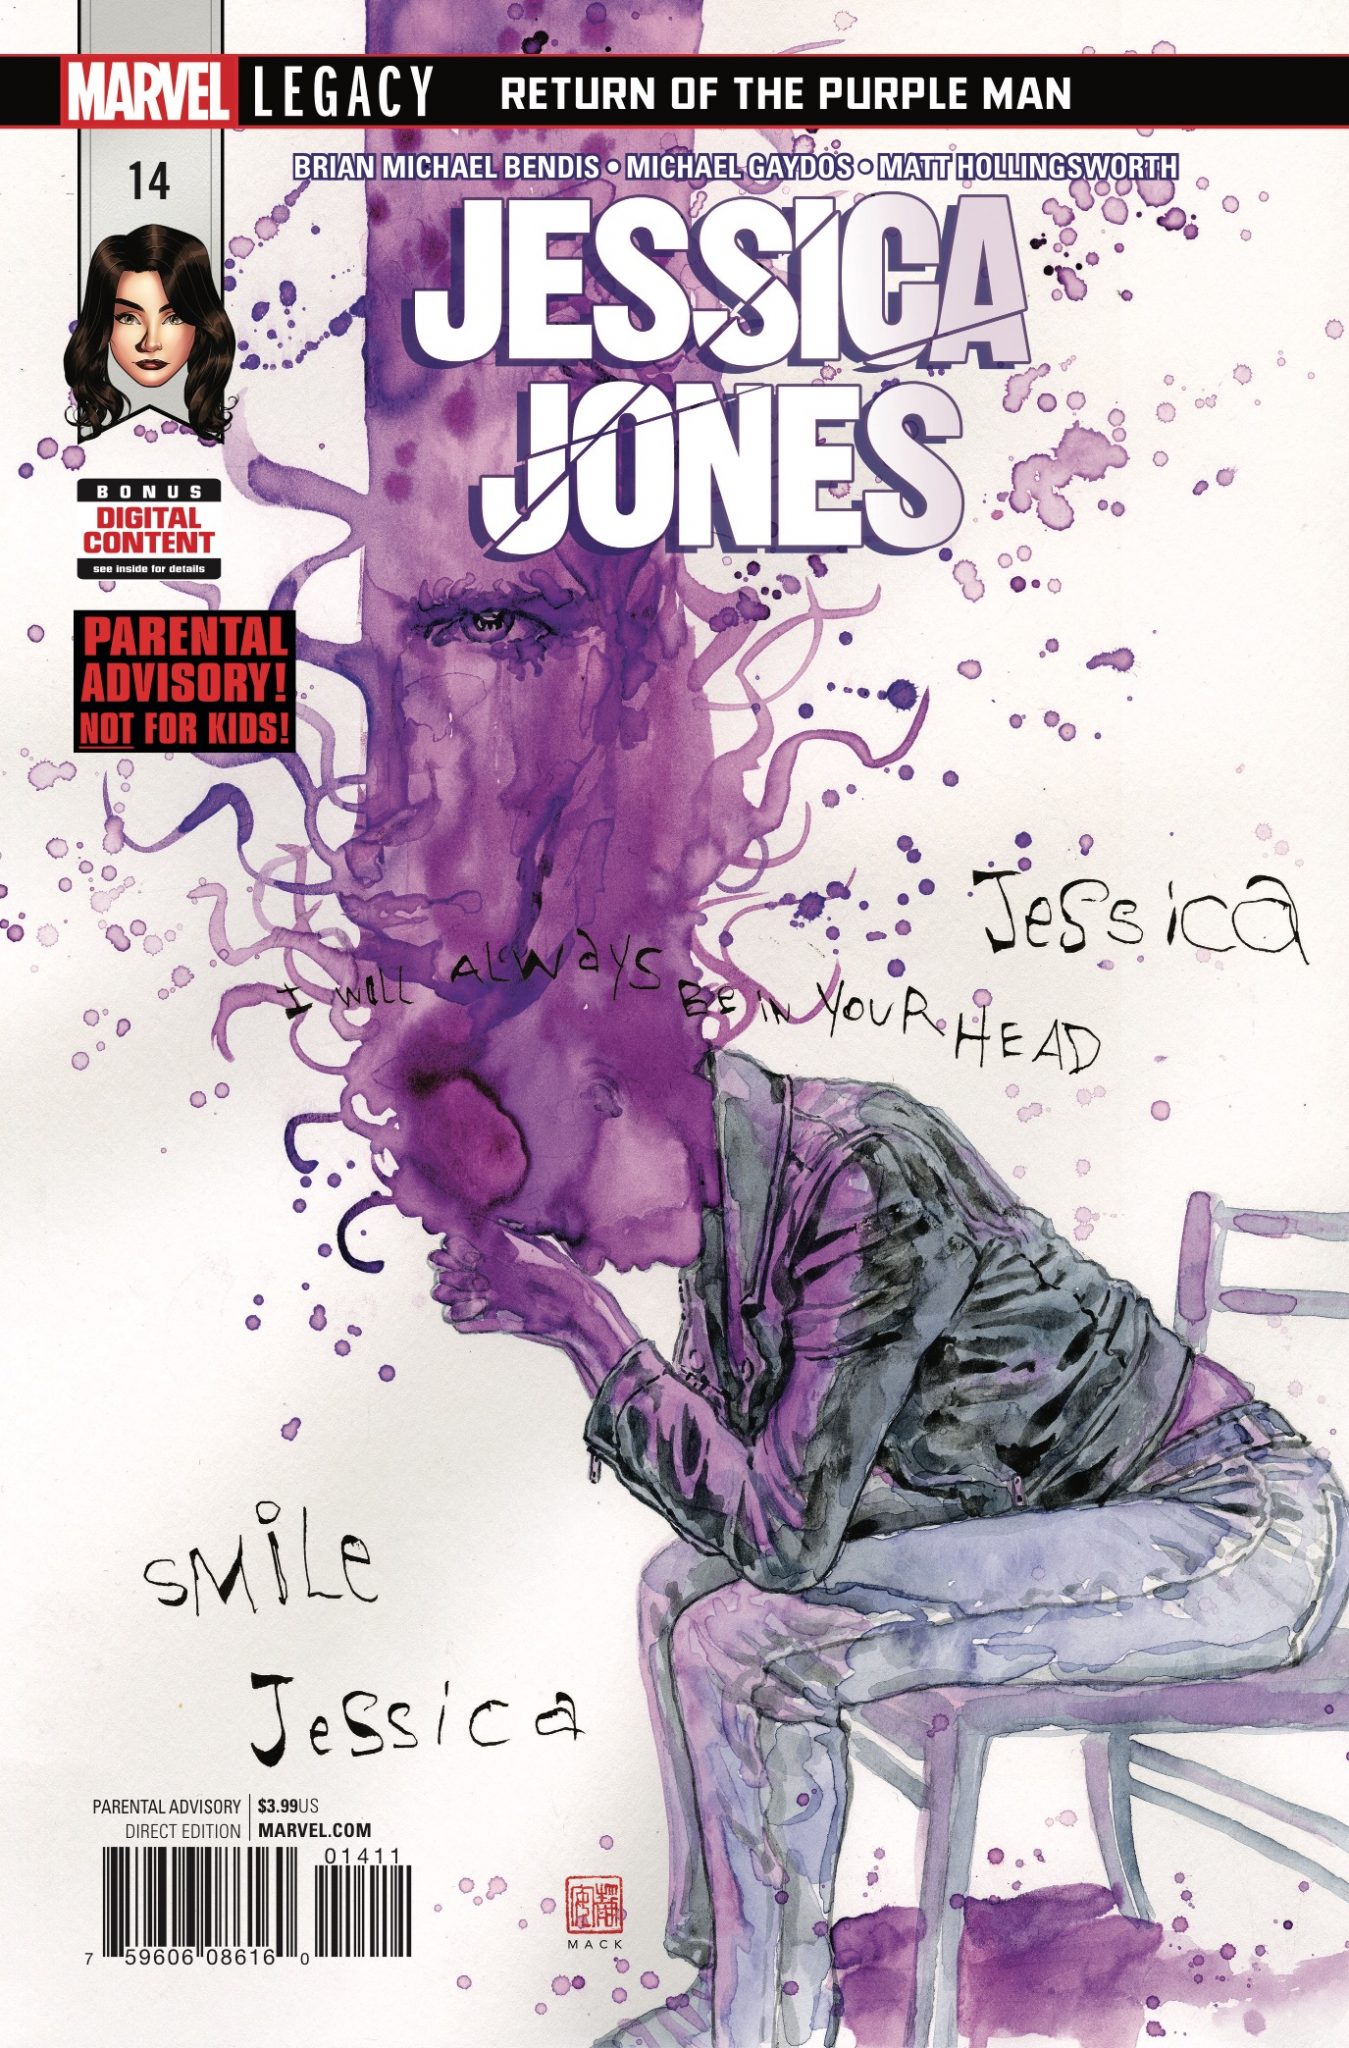 Brian Michael Bendis hand-picked a writer to take over 'Jessica Jones', and she's "amazing"